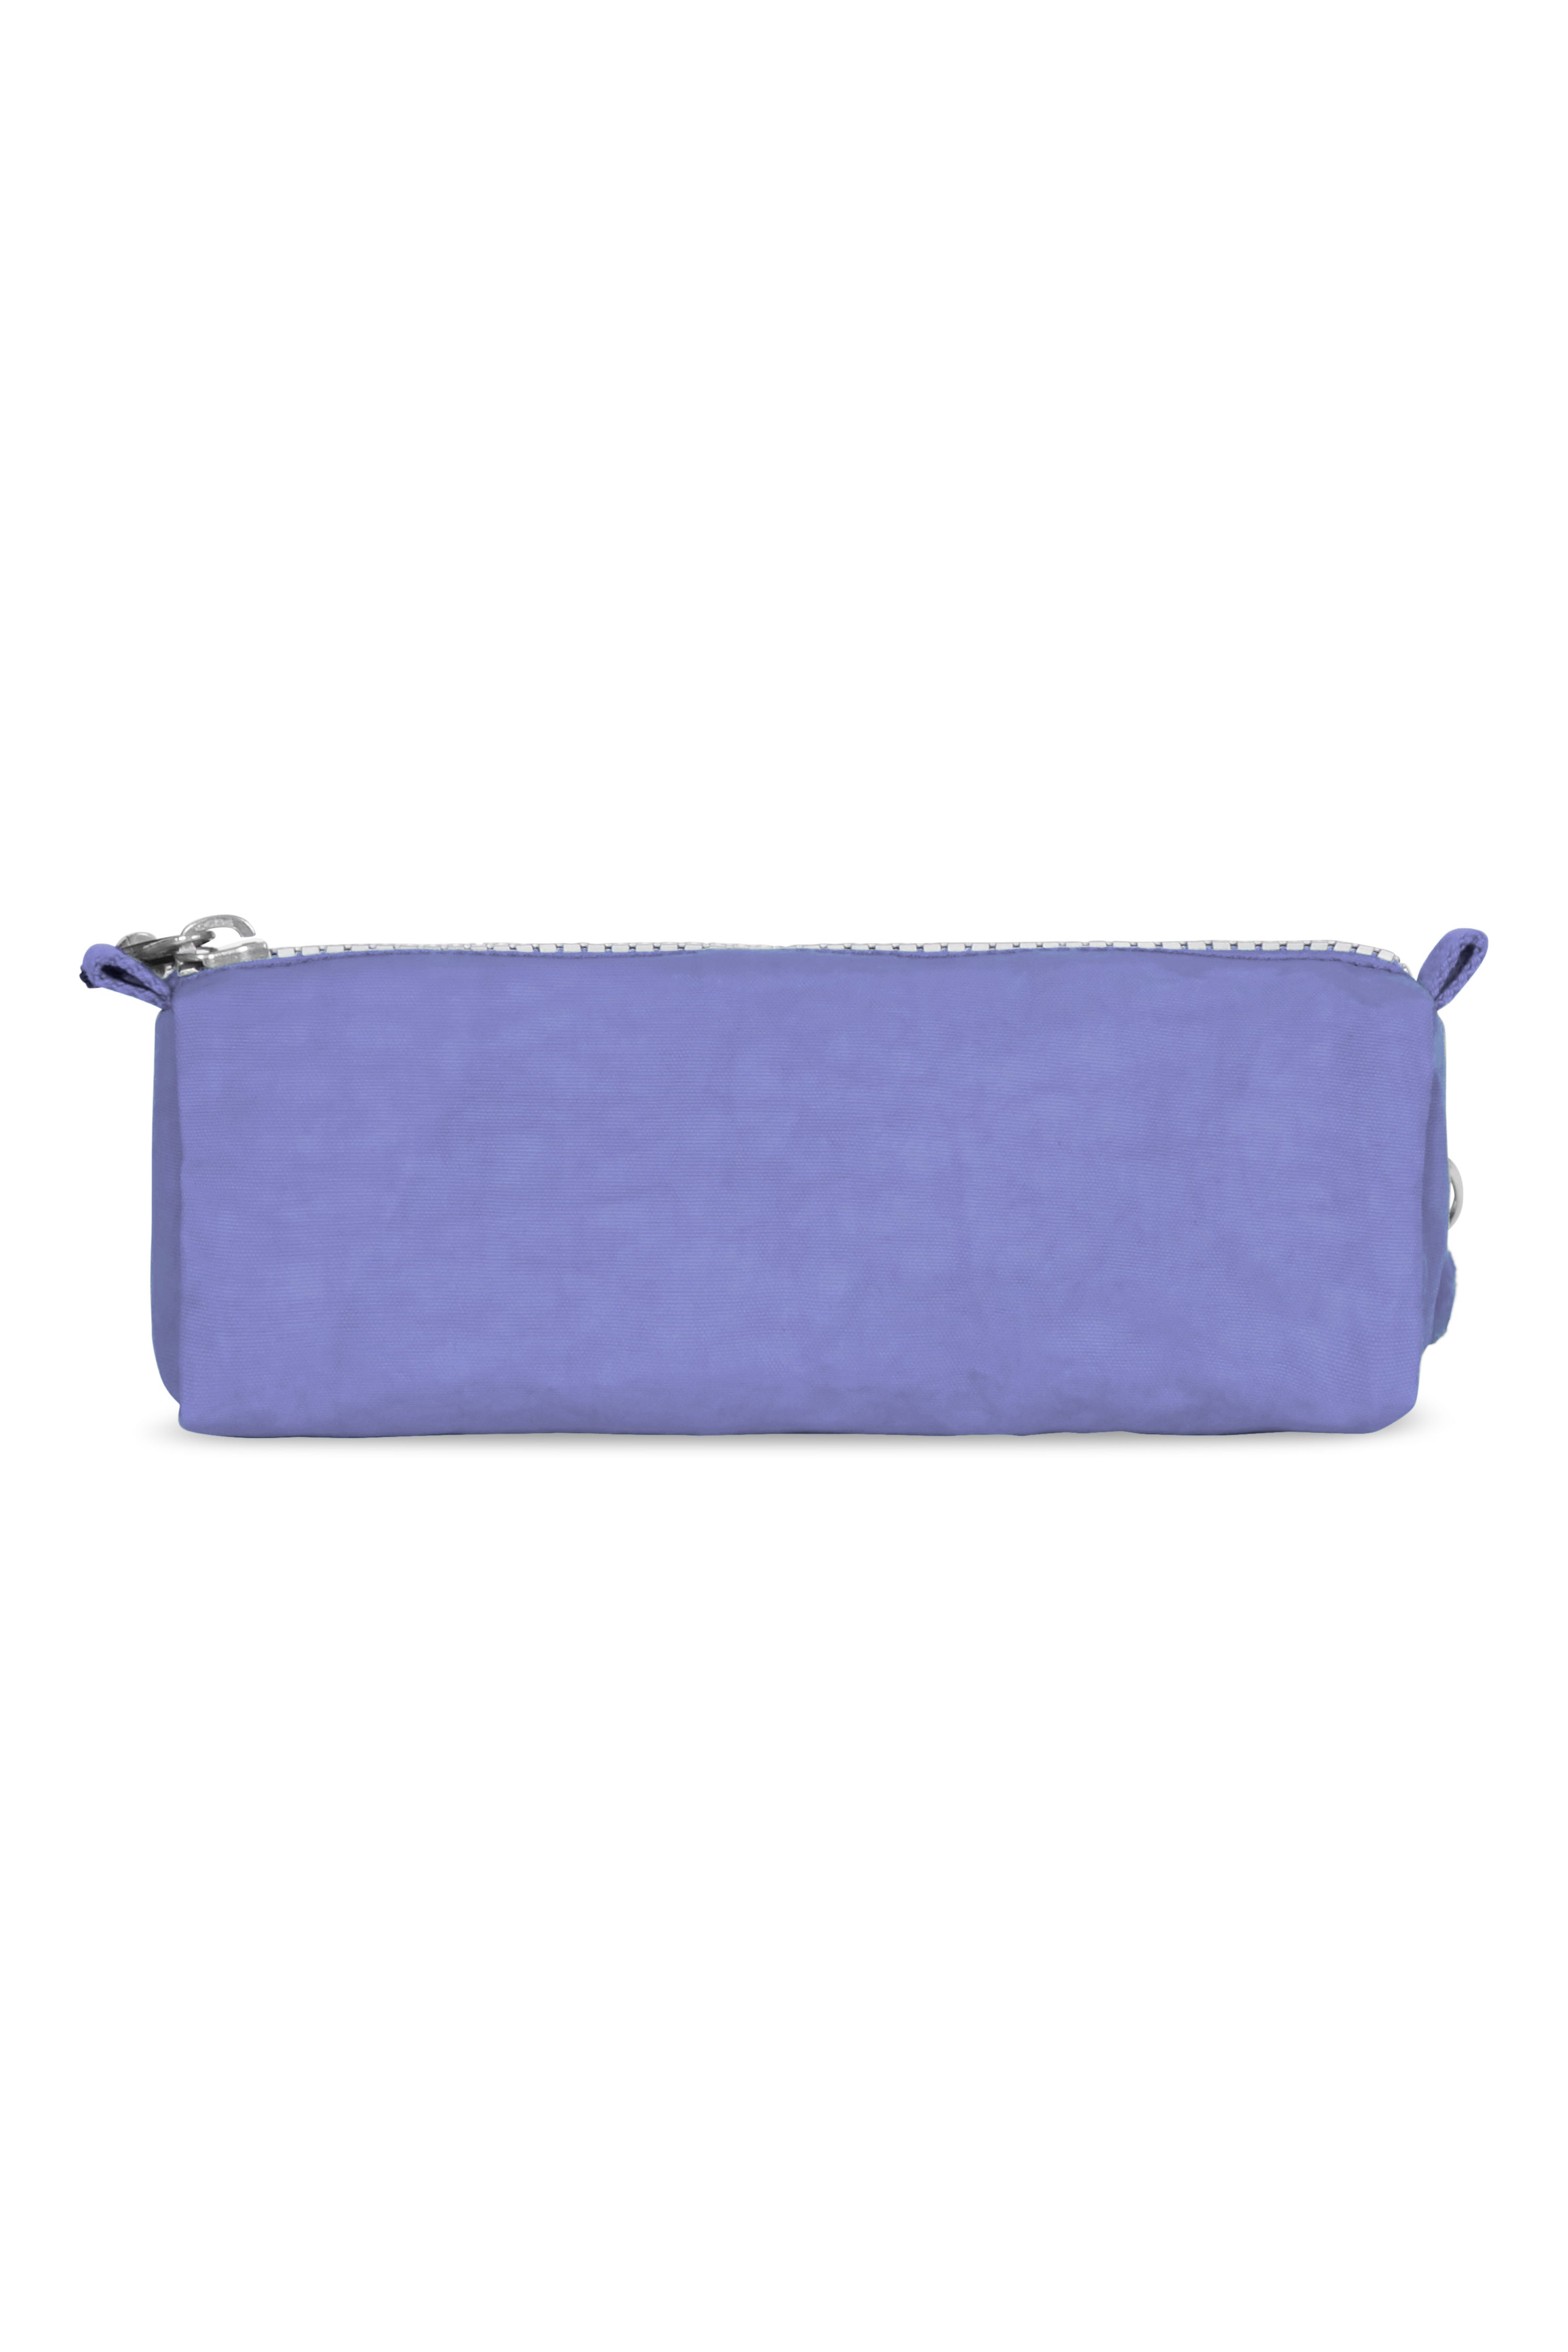 Thermal Kipling Lunch Bag and Pencil Case, Purple